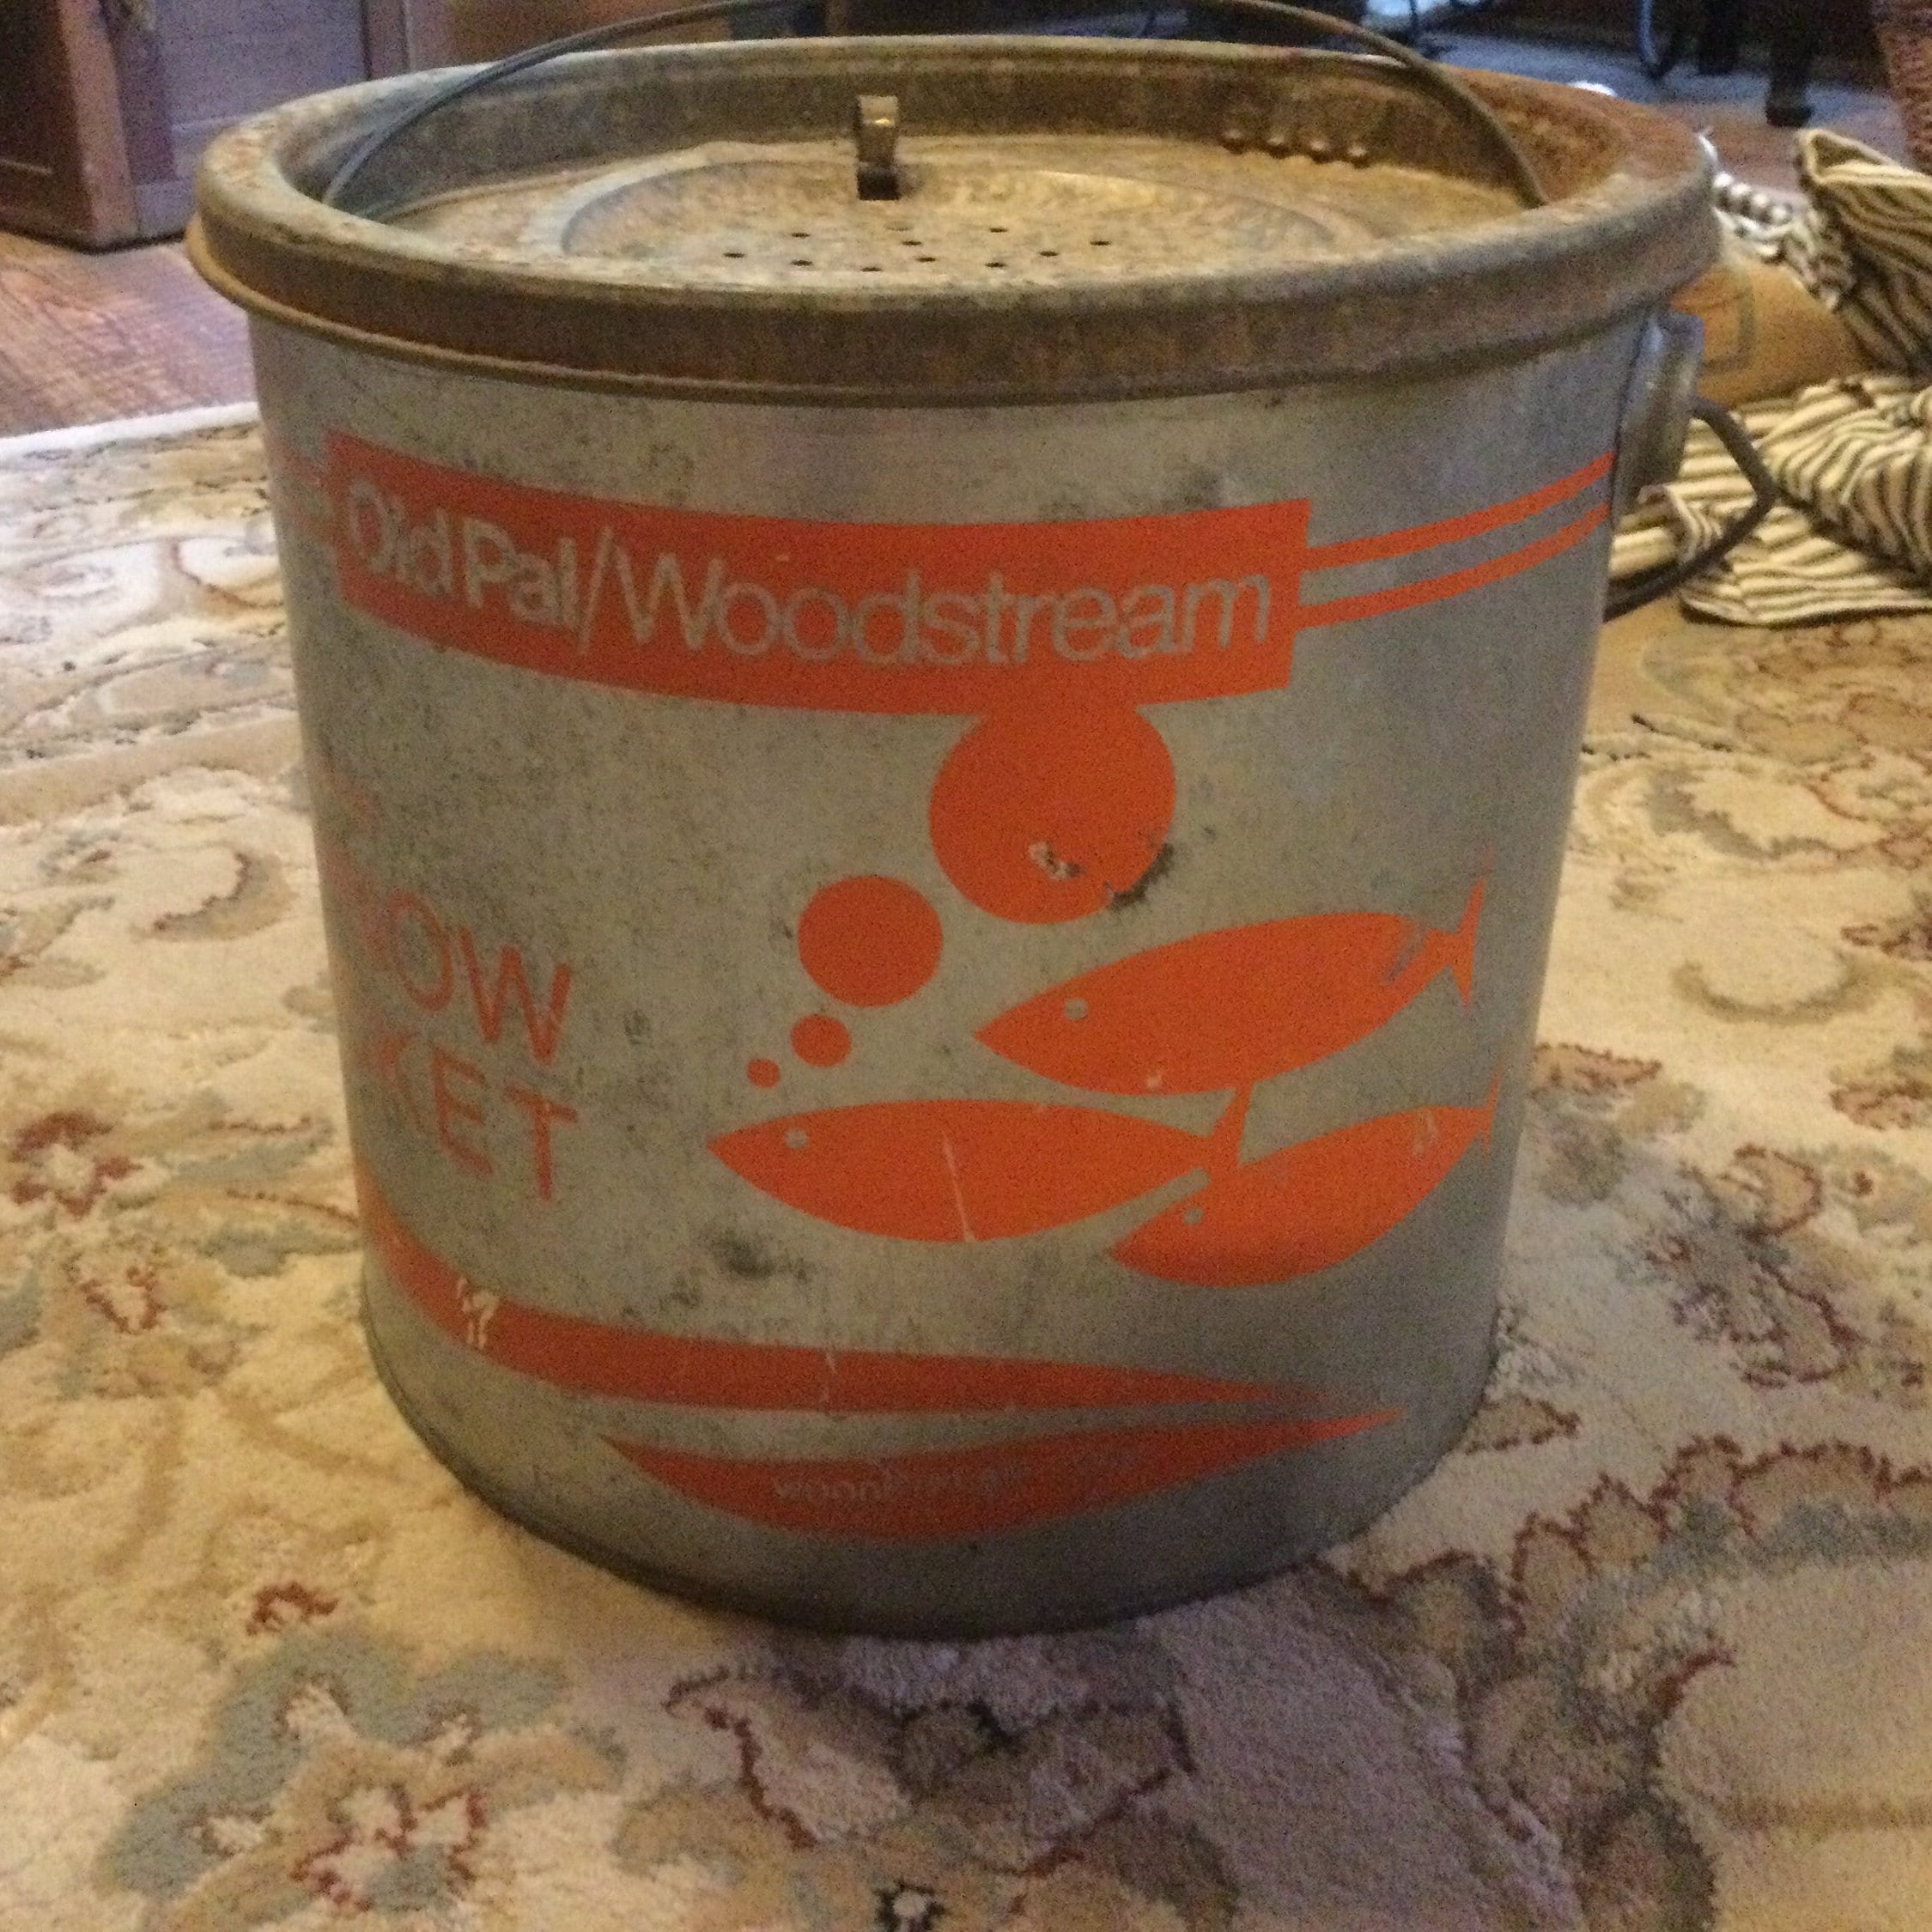 Vintage Old Pal Wading Bait Can Galvanized Bucket Orange Graphics 1960s to  1980s Round Wood Handle Retro Fishing Floating Metal Minnows/bait -   Canada